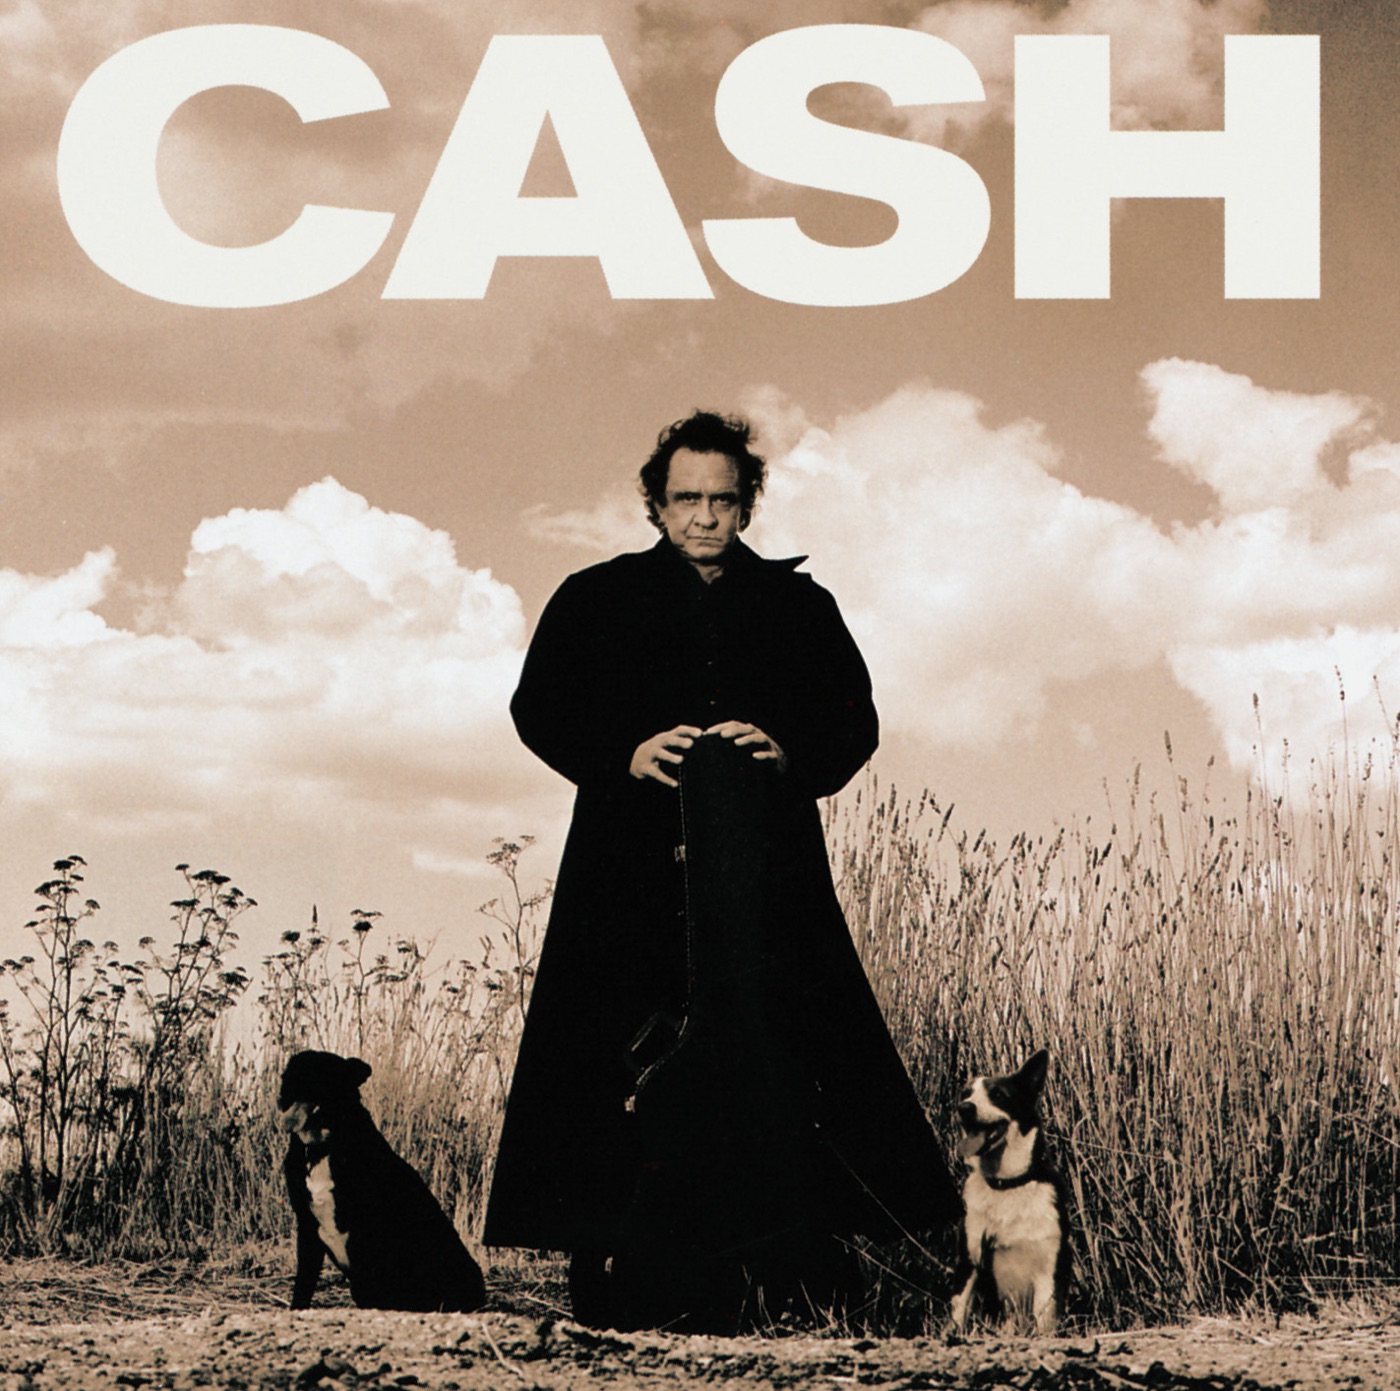 American Recordings by Johnny Cash